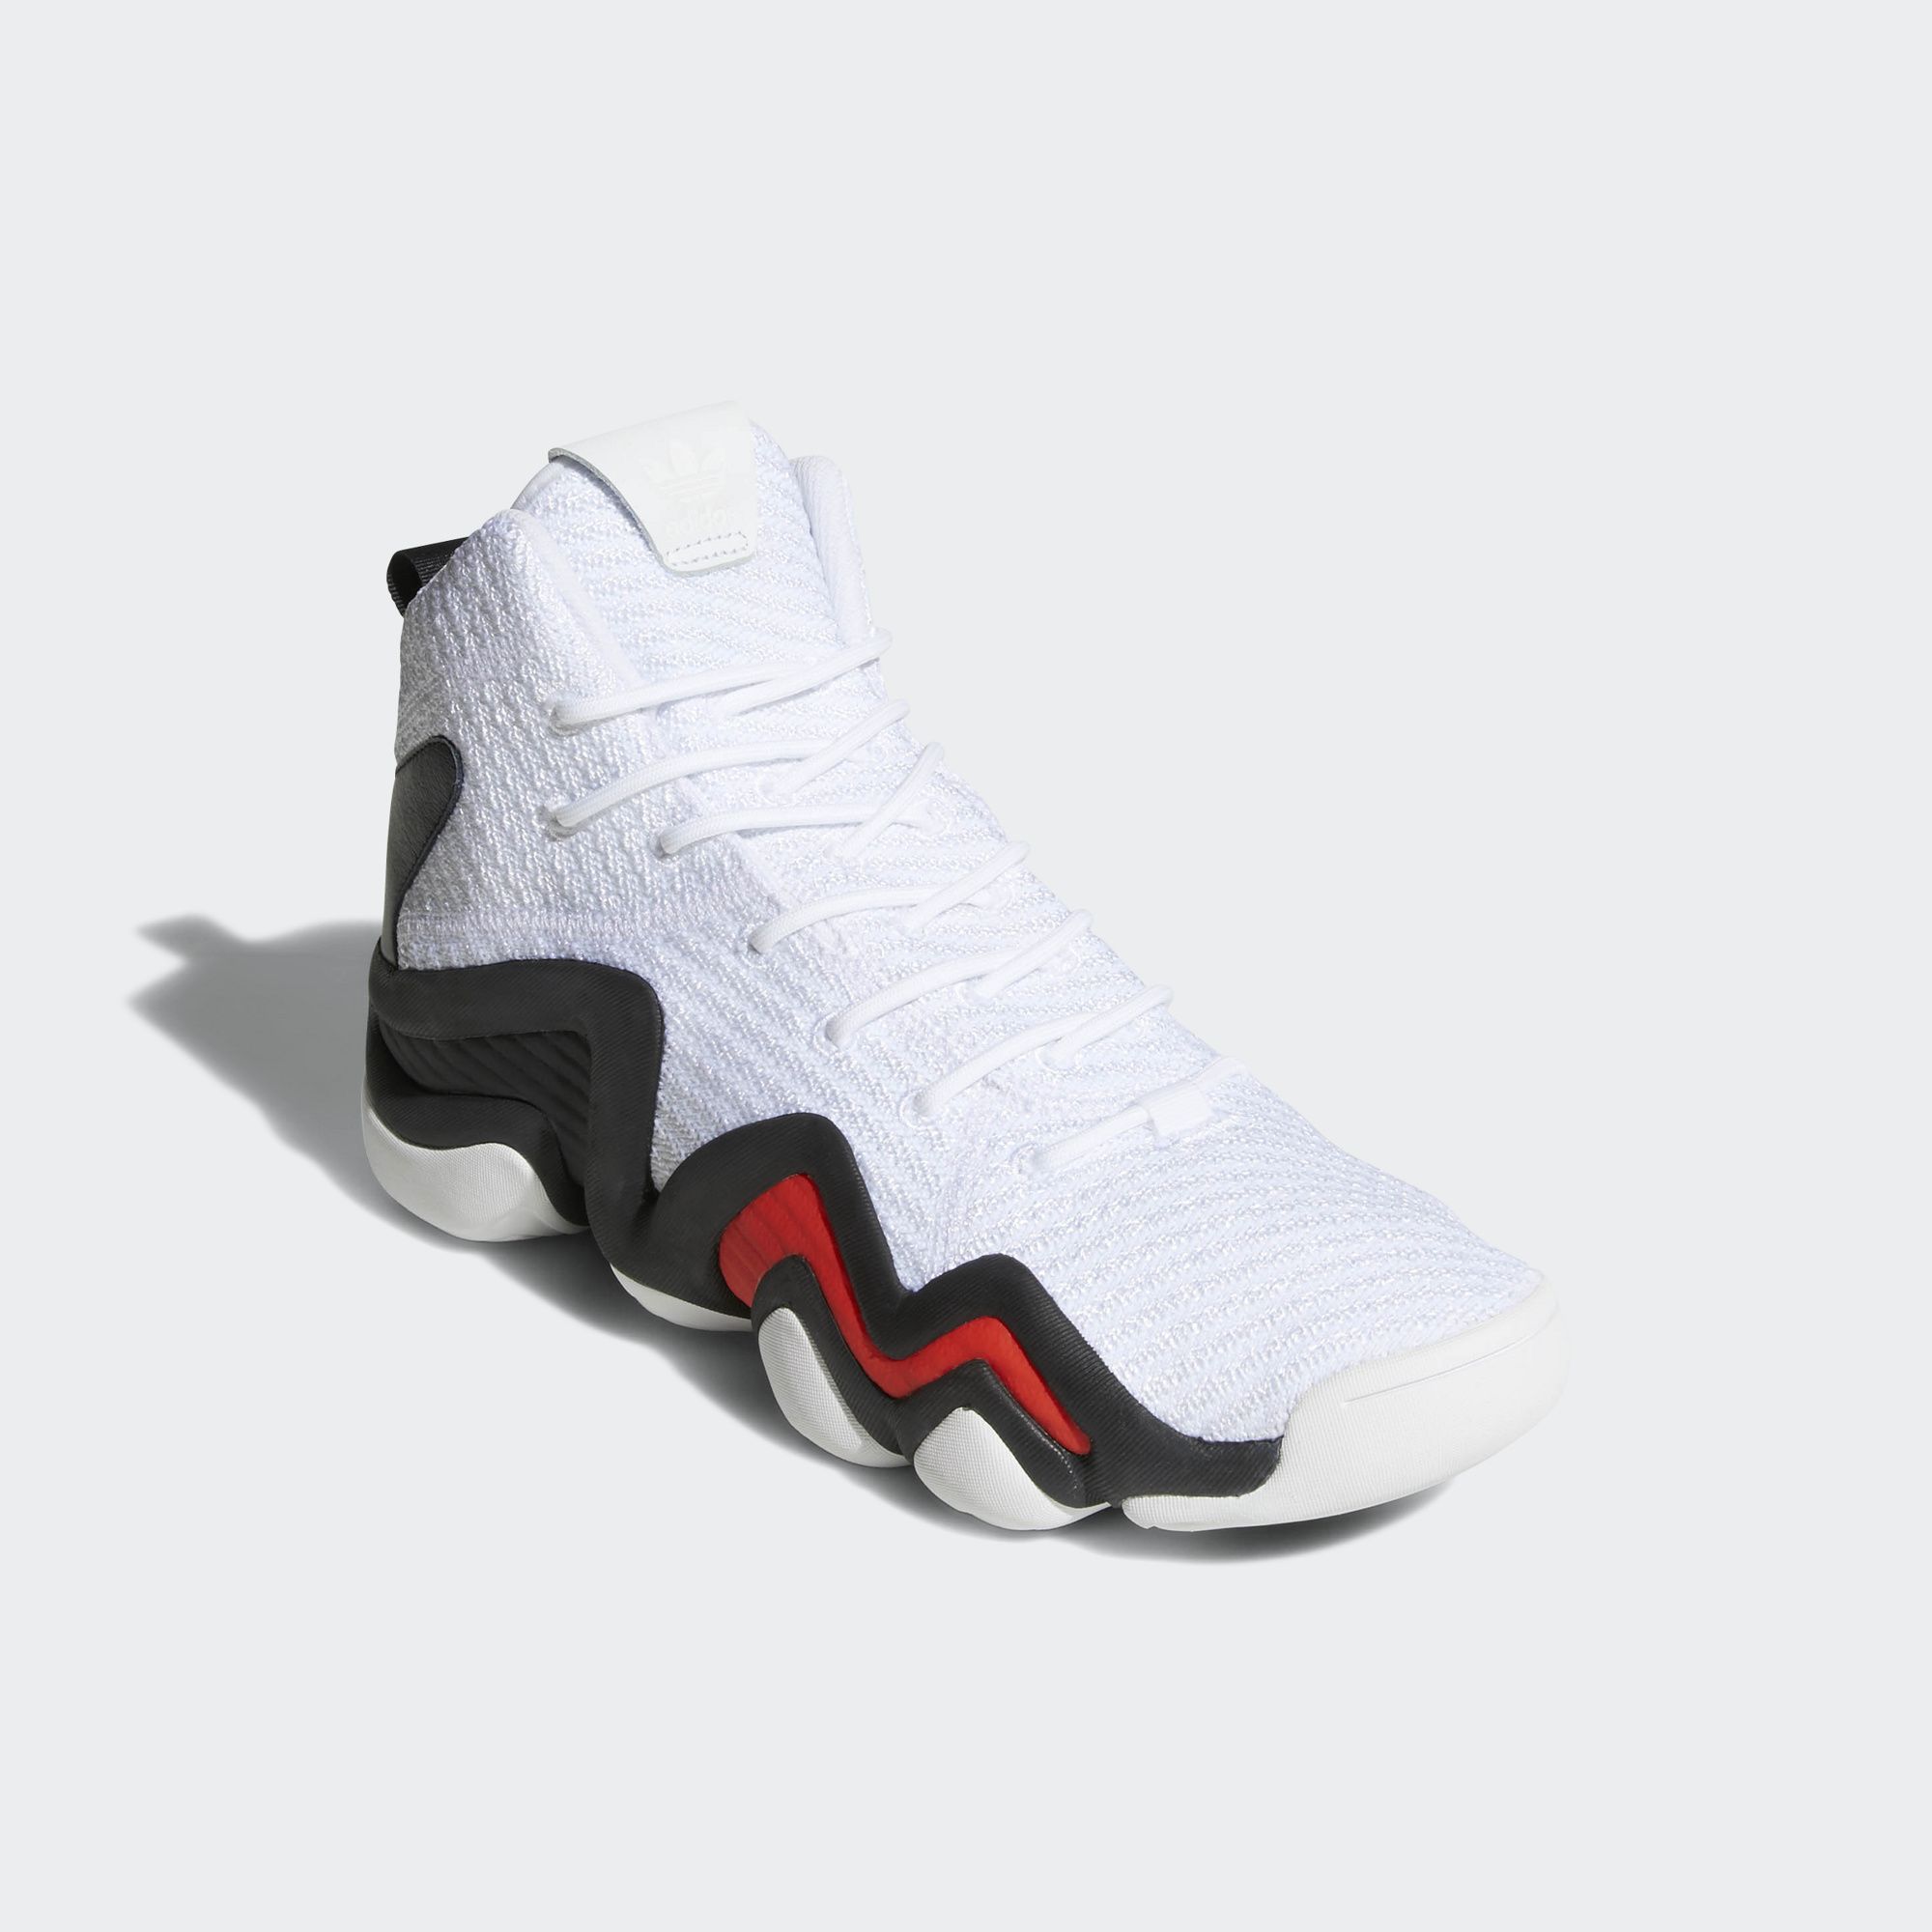 adidas crazy 8 adv pk red 3 weartesters